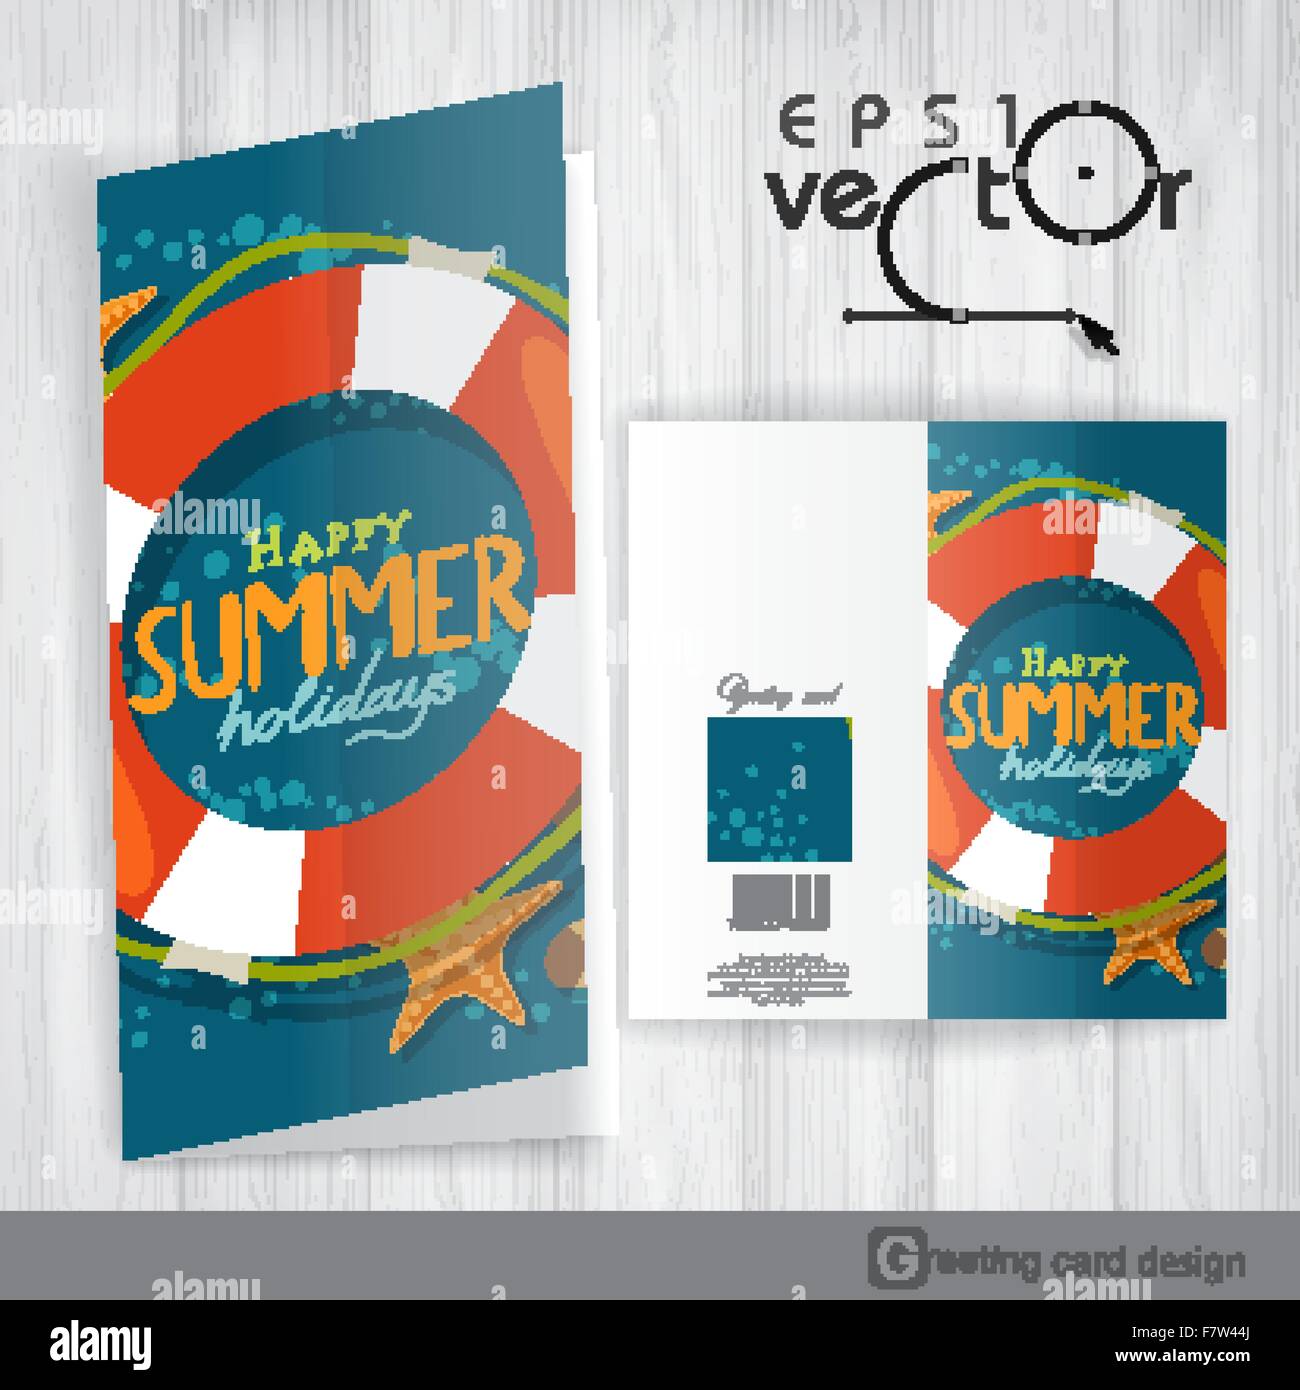 Greeting Card Design, Template Stock Vector